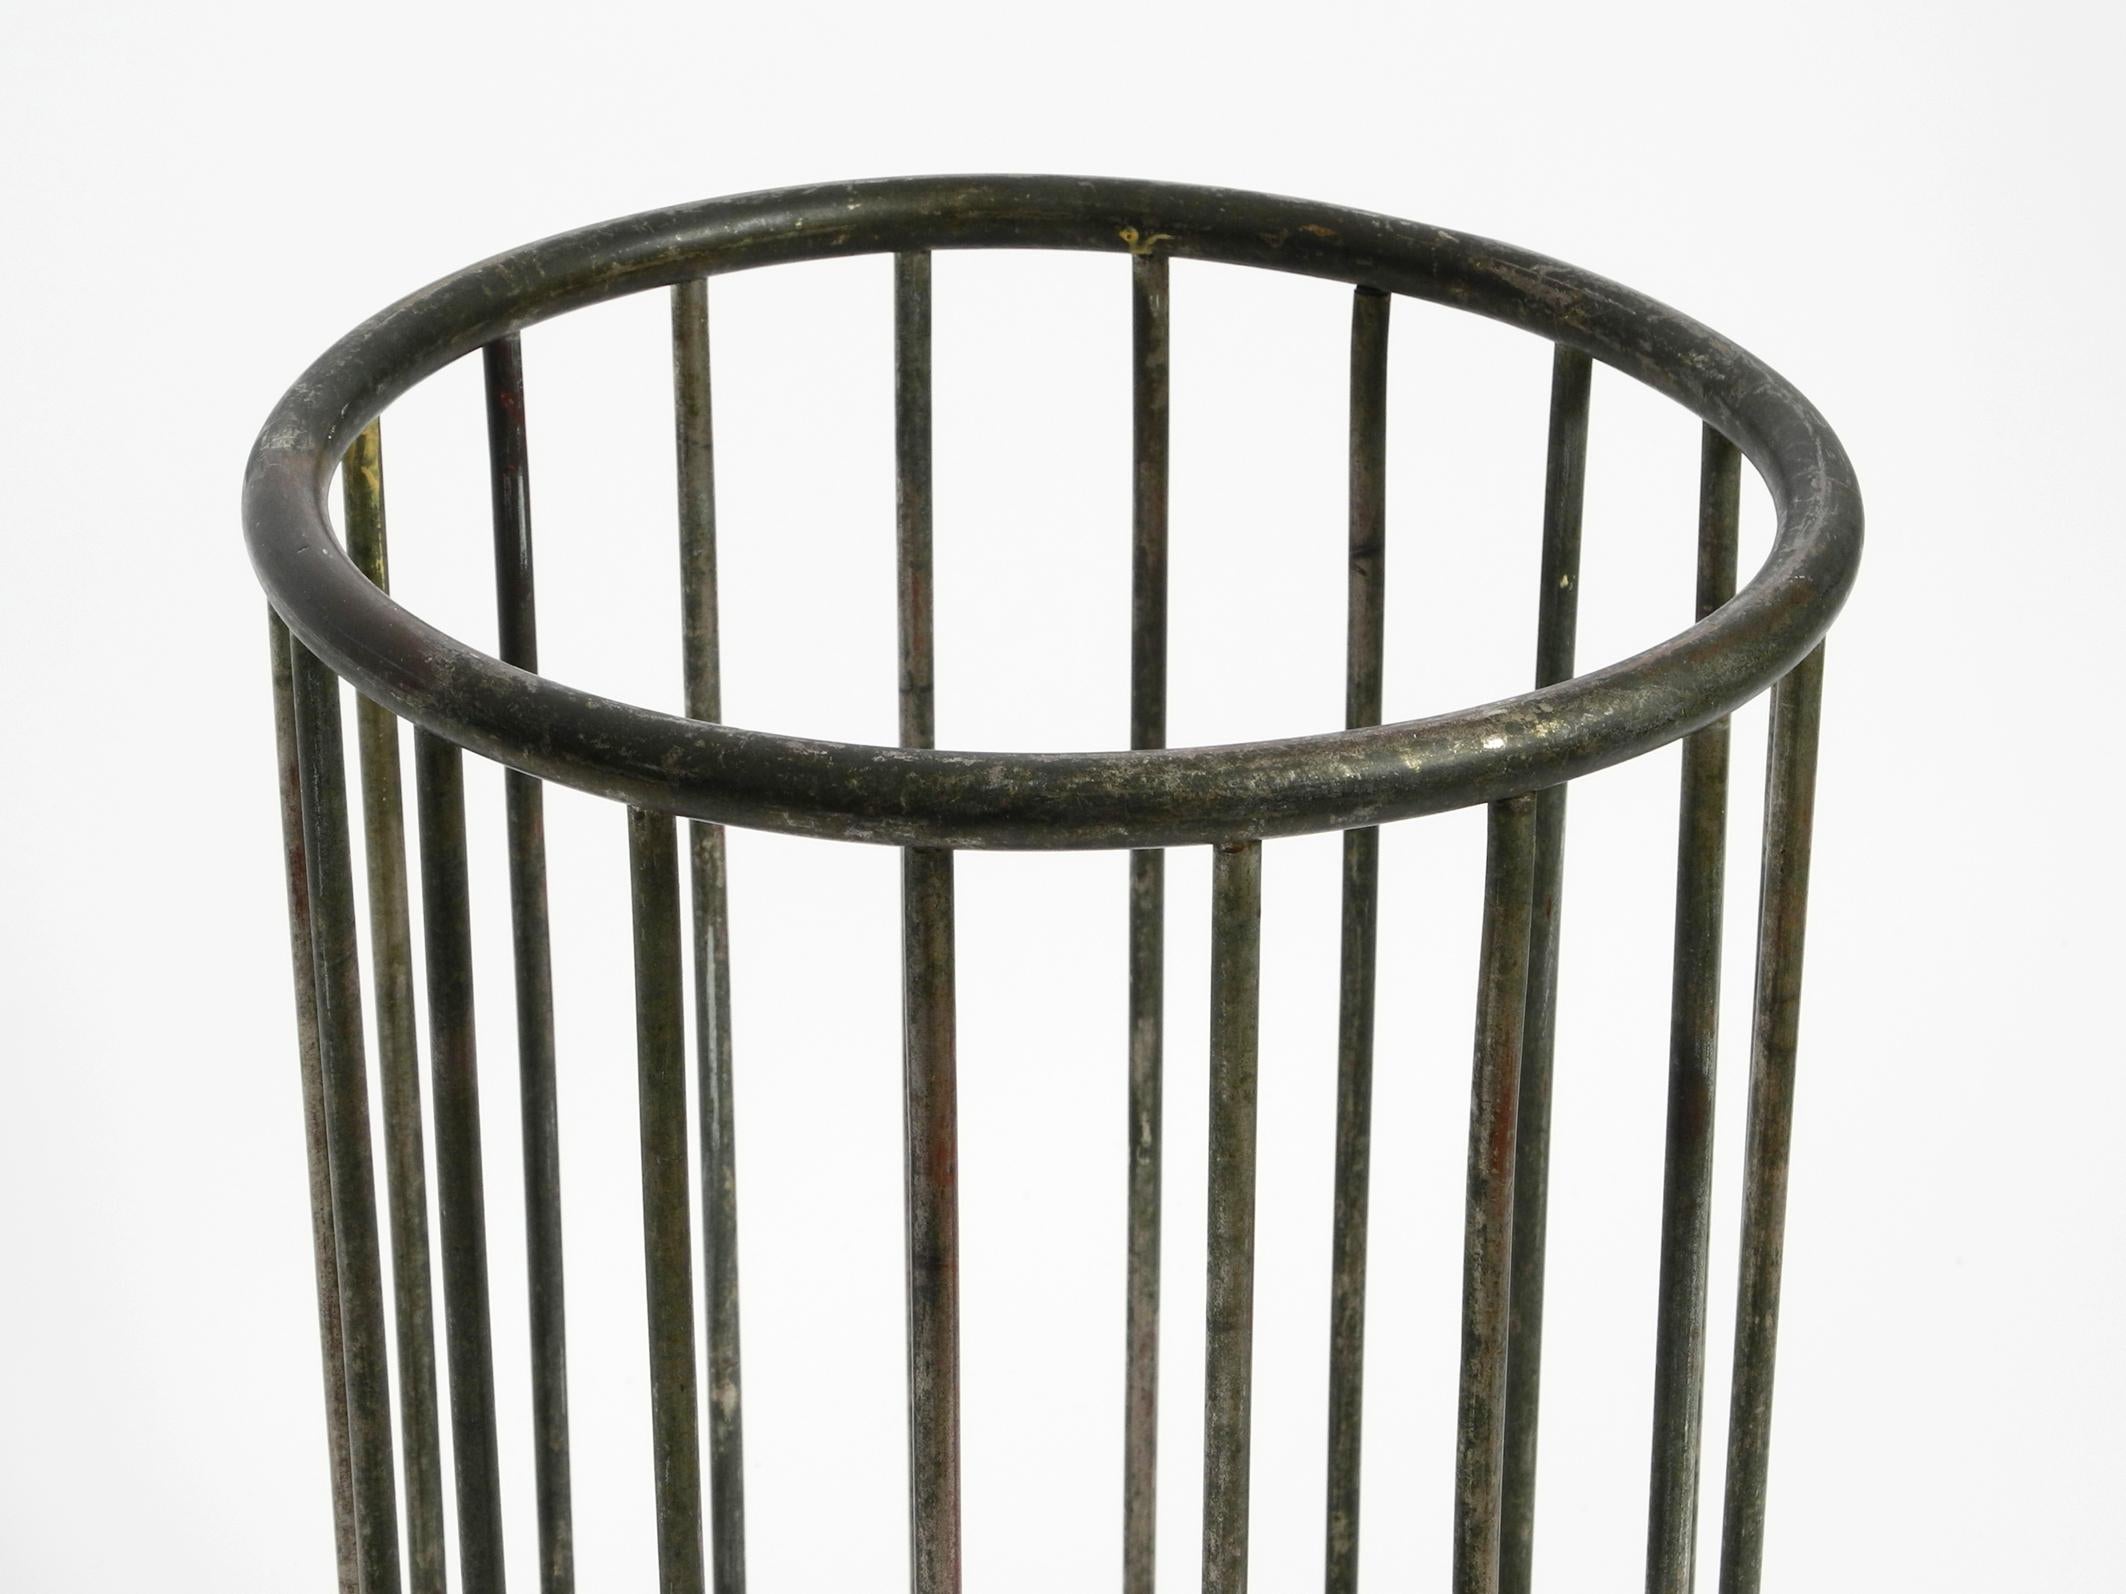 Early 20th Century Original Mott's Plumbing Towel Basket Made of Nickel-Plated Brass from the 1910s